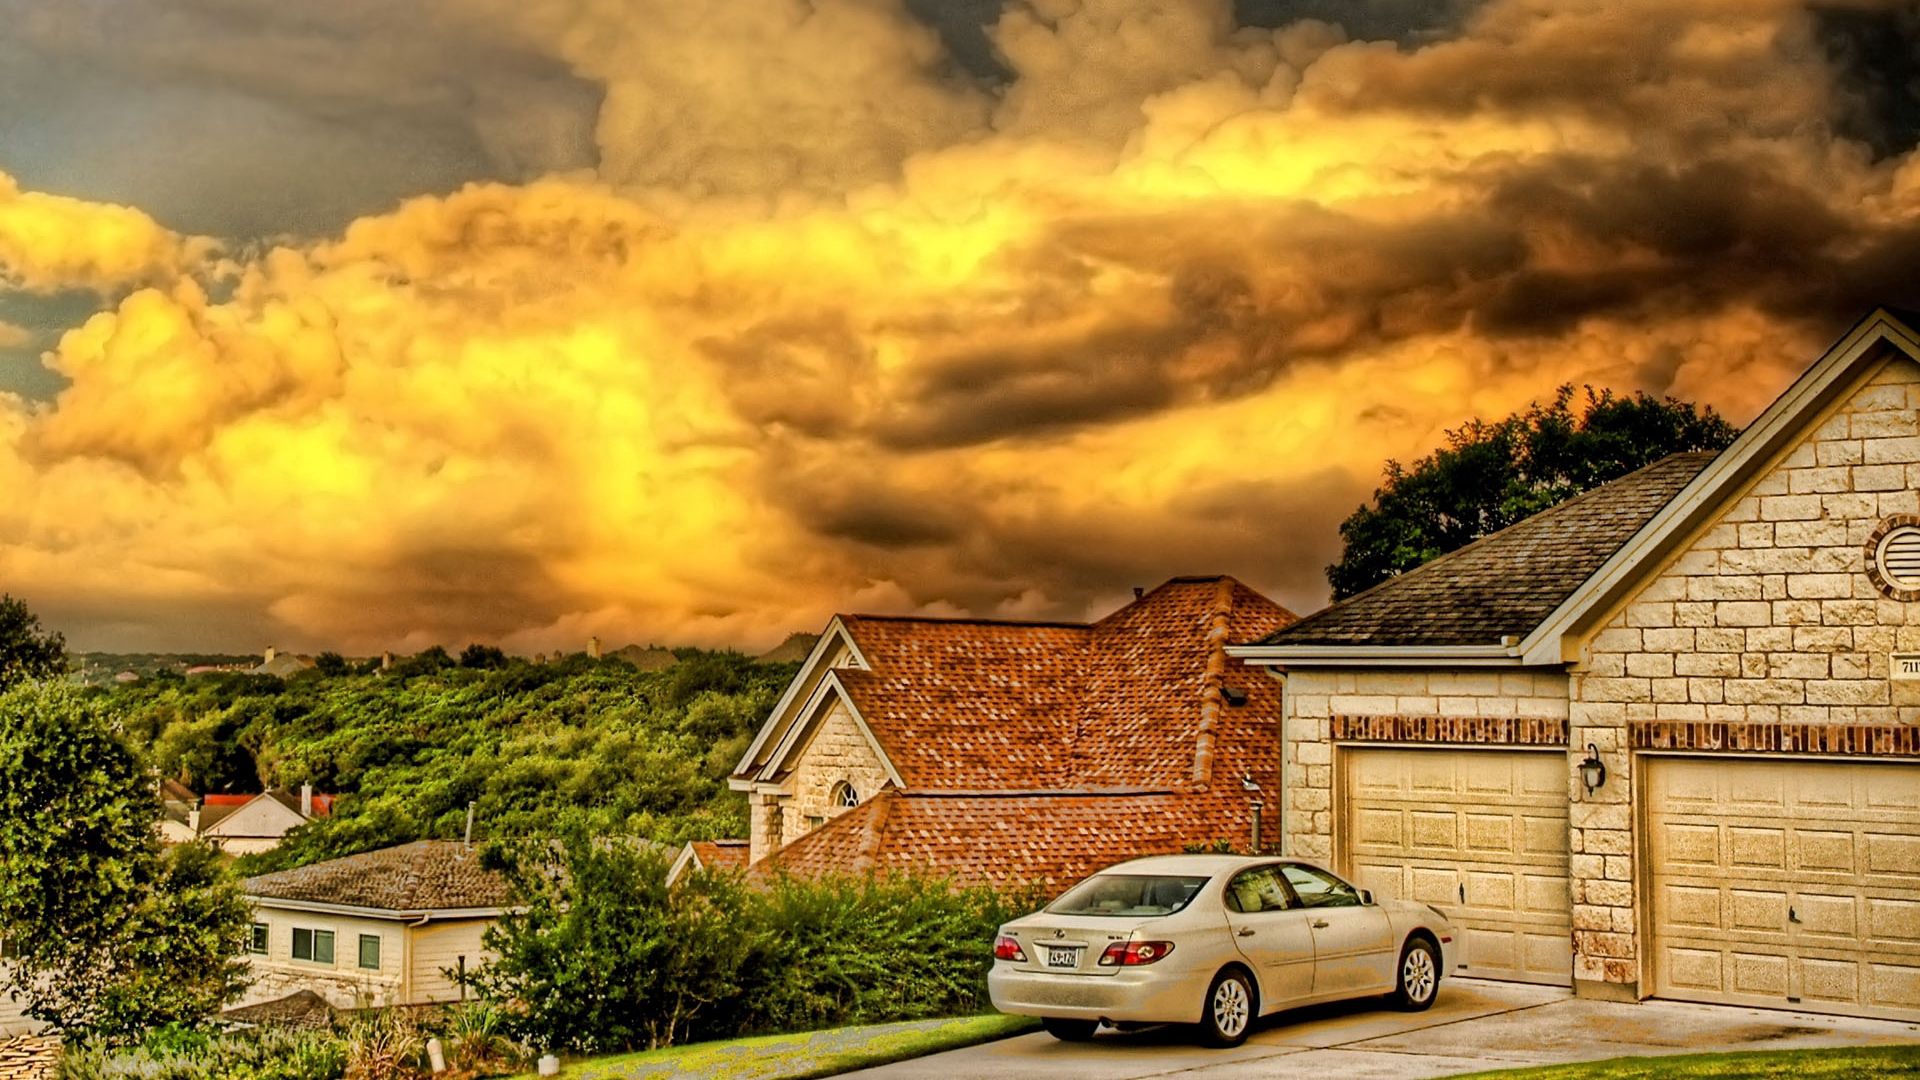 cities, building, car, hdr, garage High Definition image